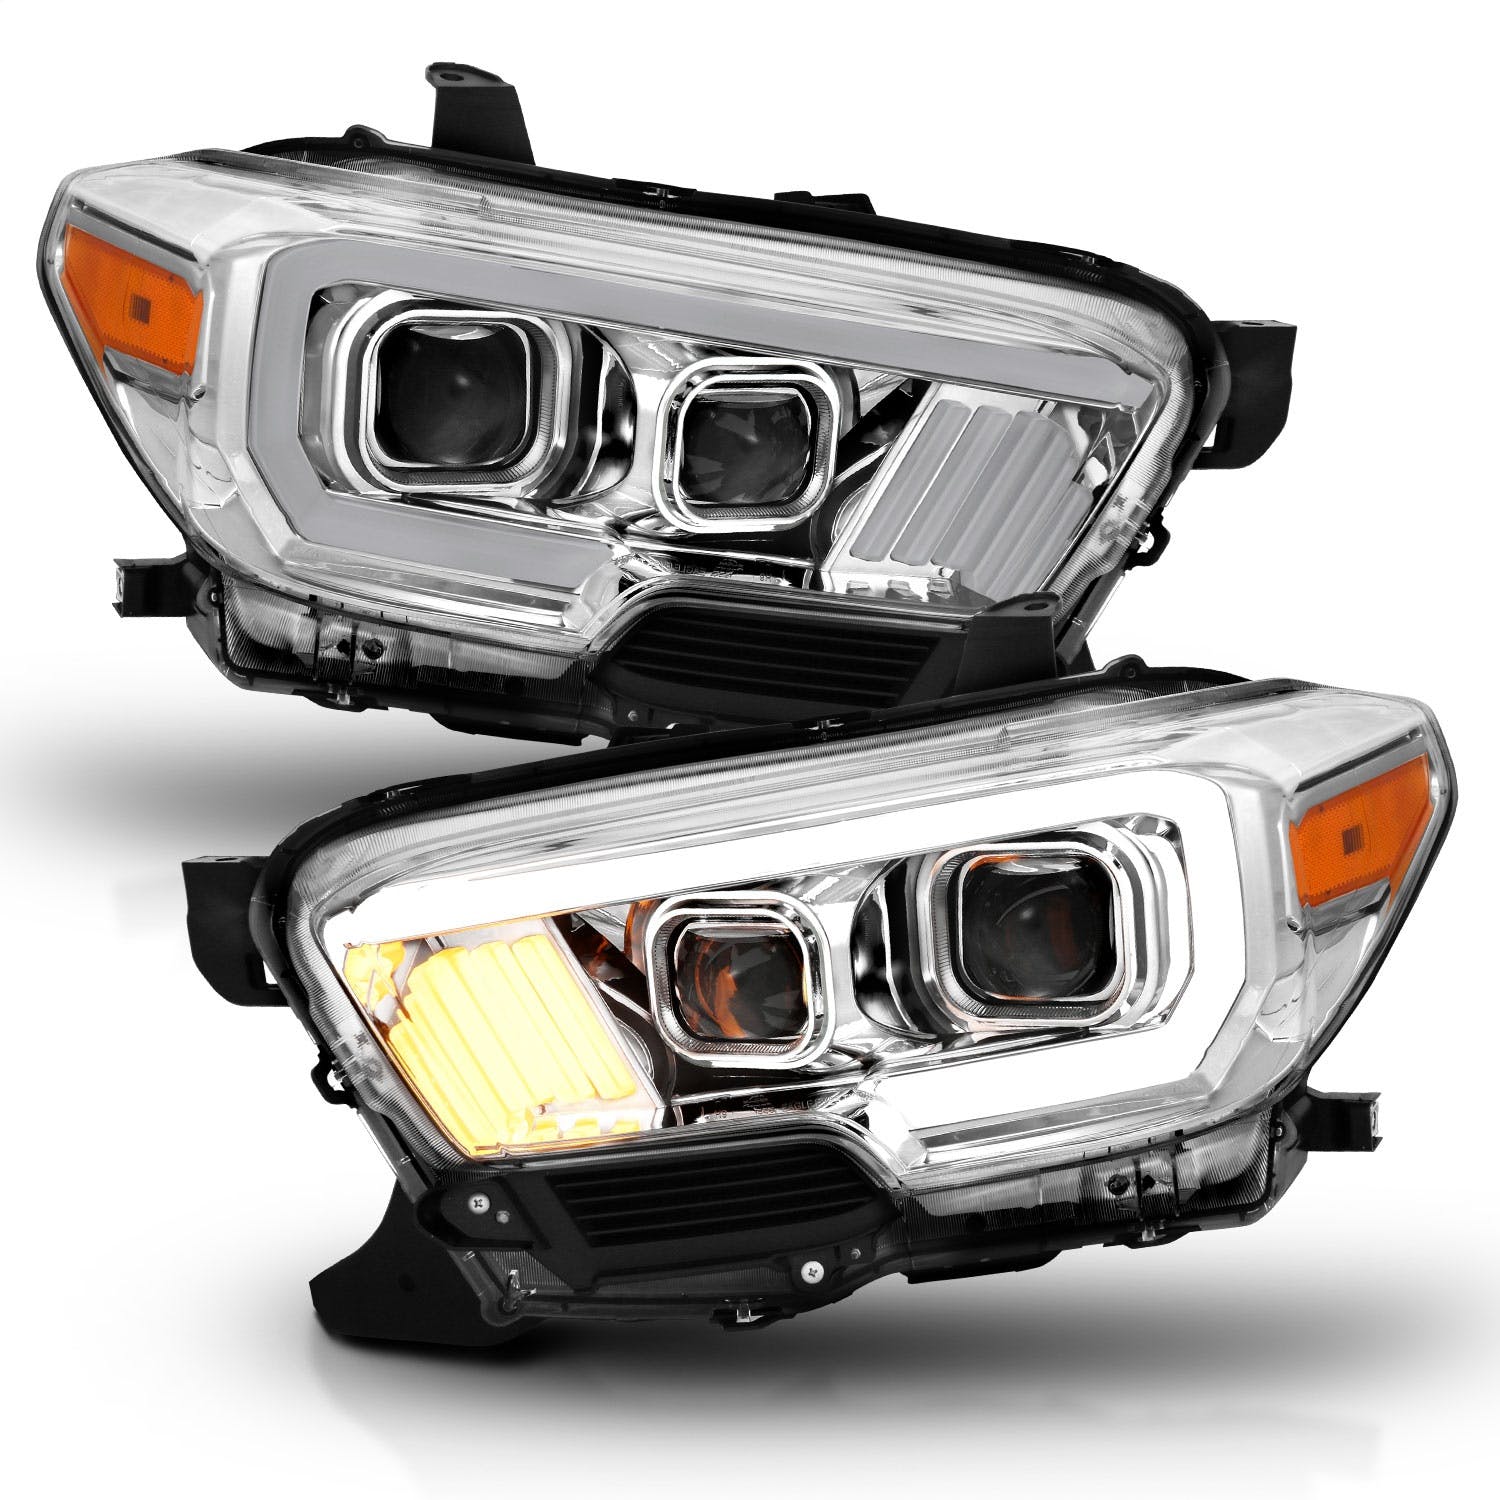 AnzoUSA 111380 Projector Headlights with Plank Style Design Chrome/Amber with DRL